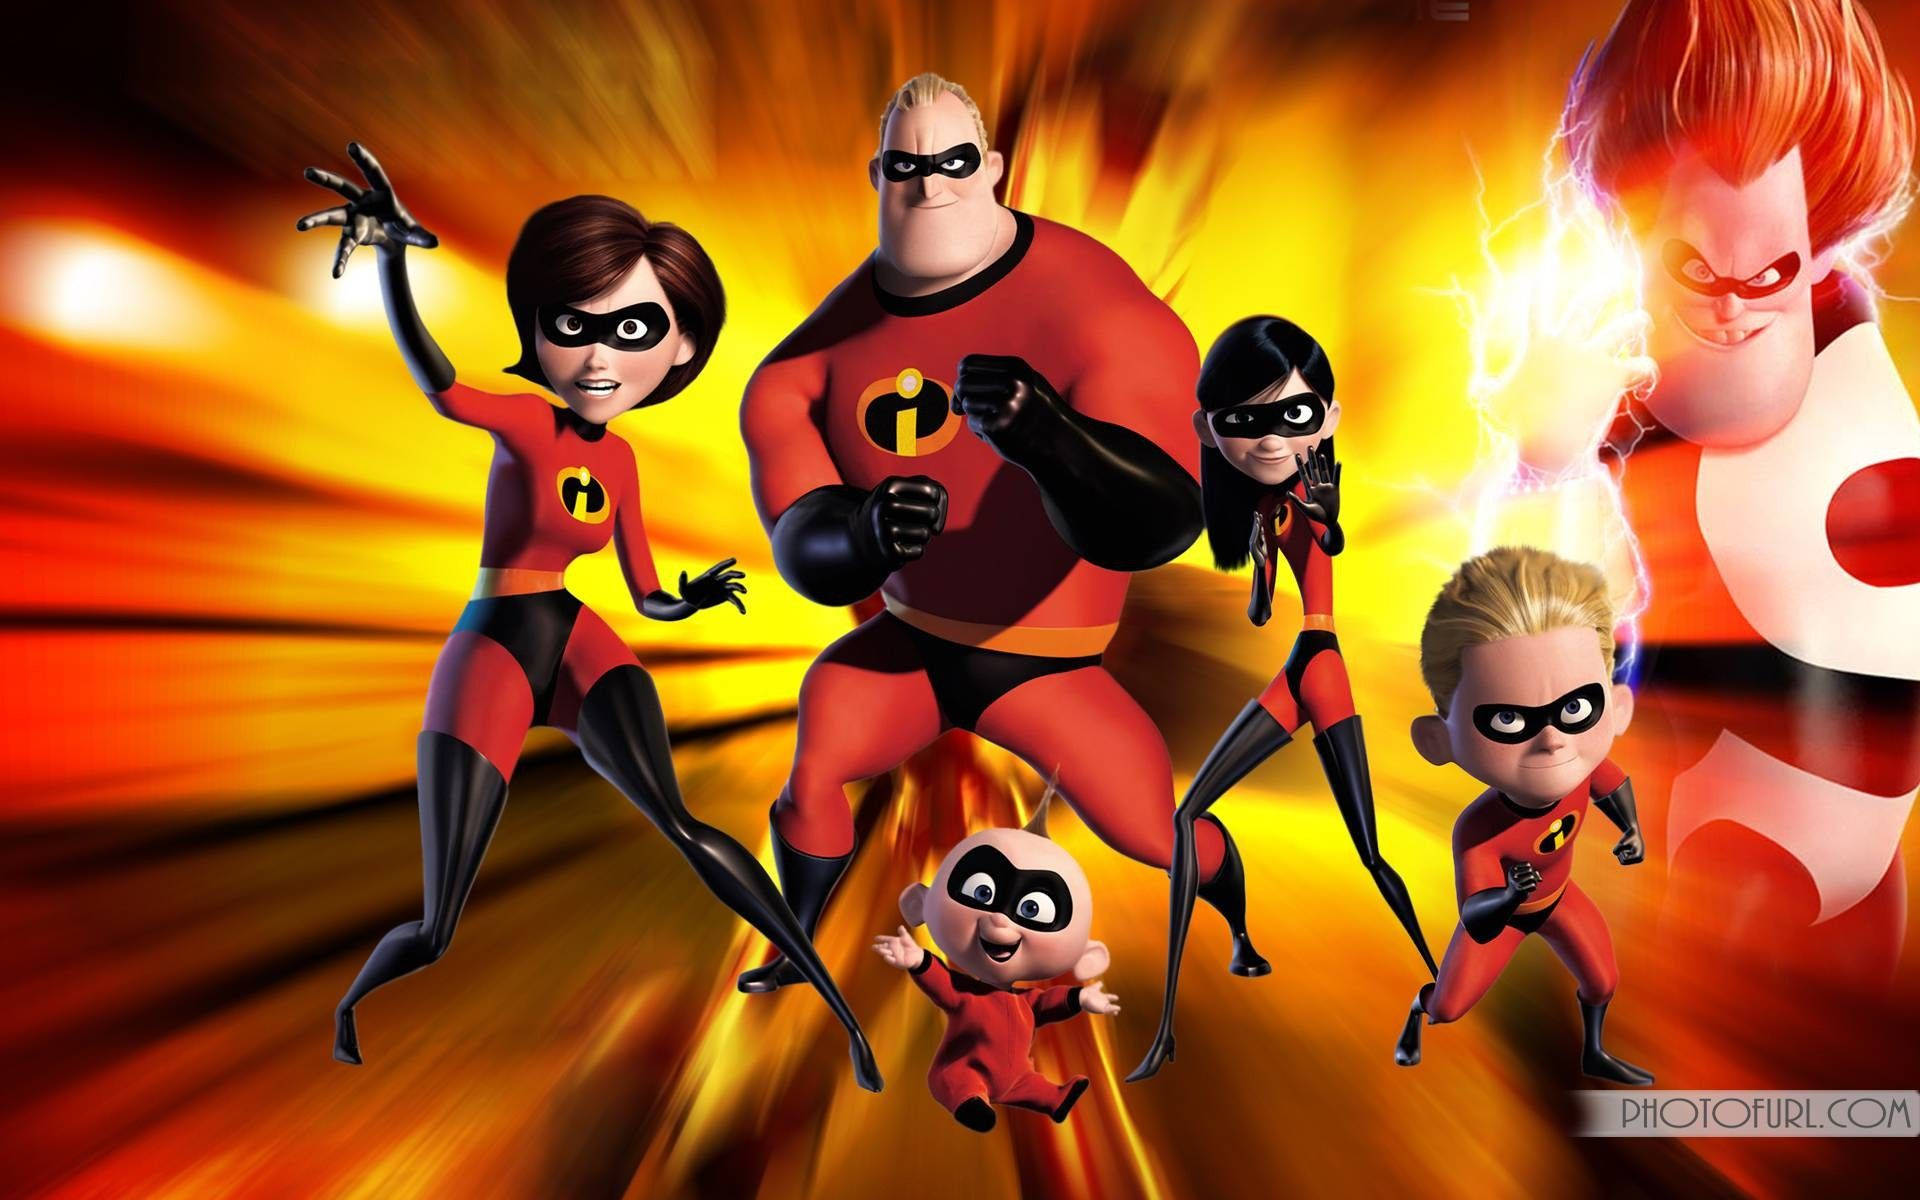 Mr. Incredible Takes On Syndrome In “the Incredibles” Background